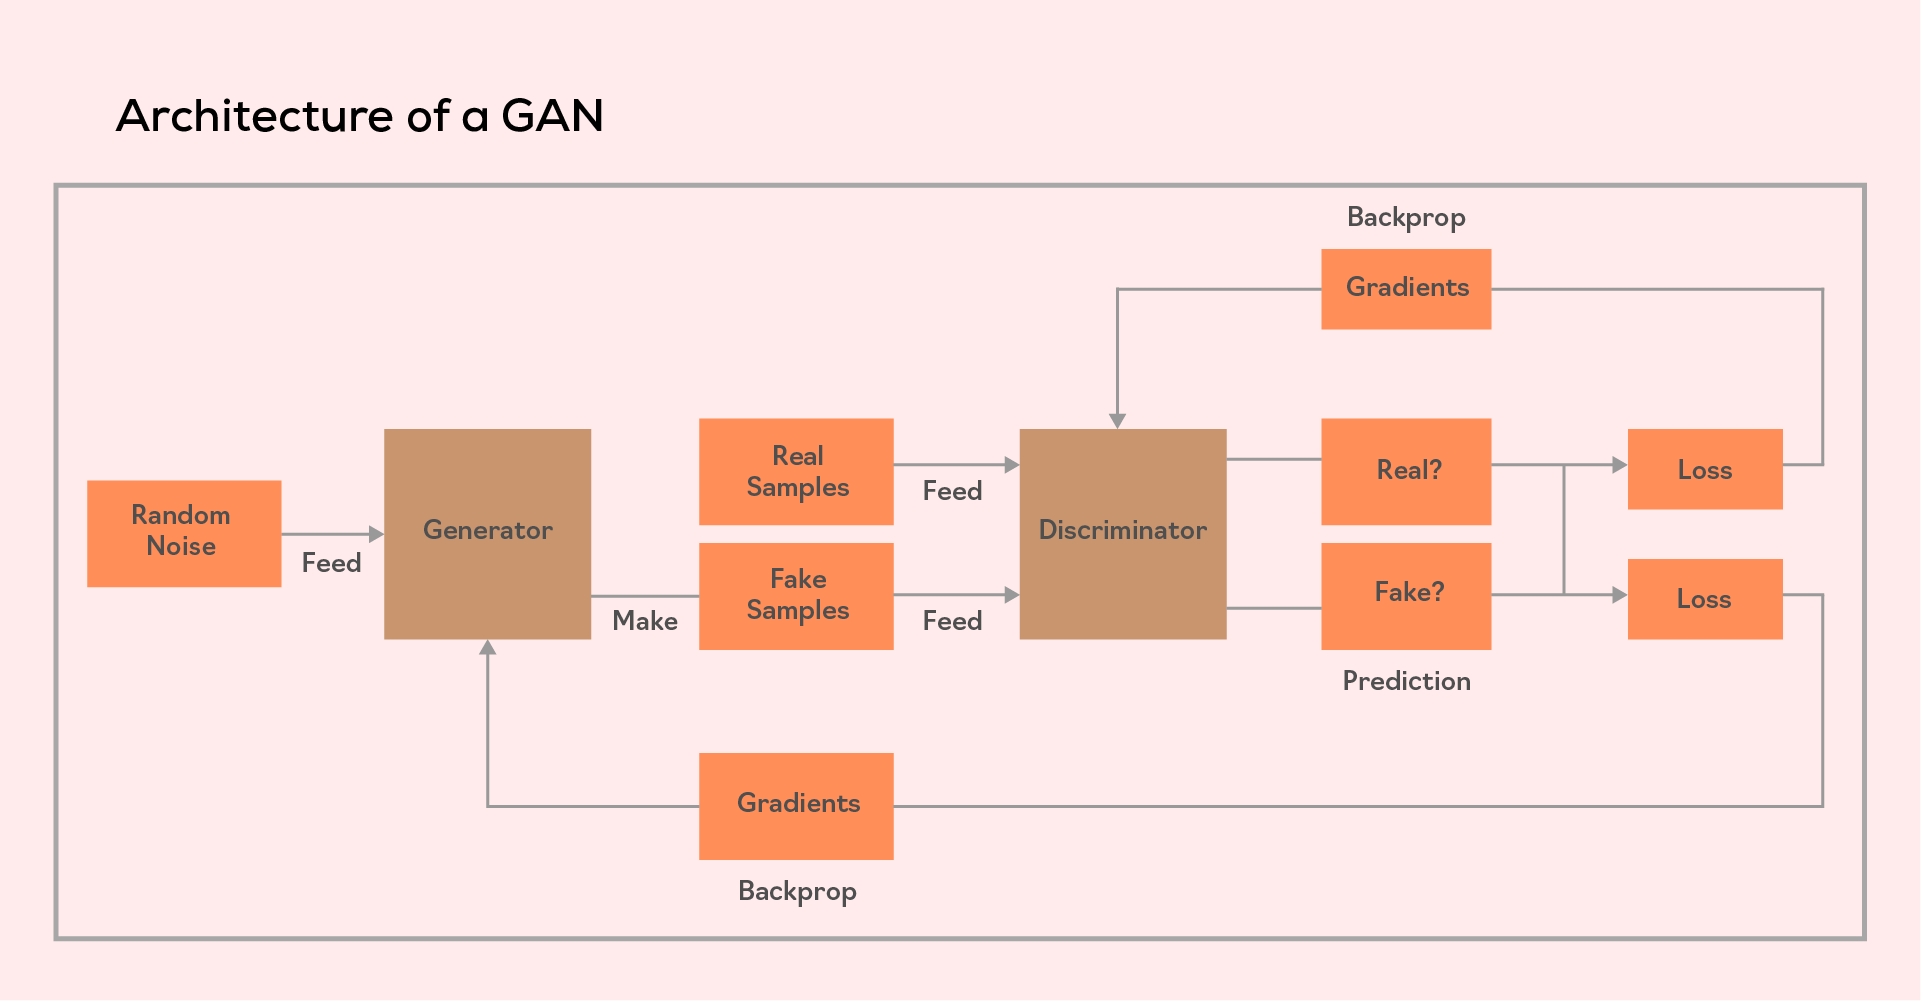 Architecture of a GAN